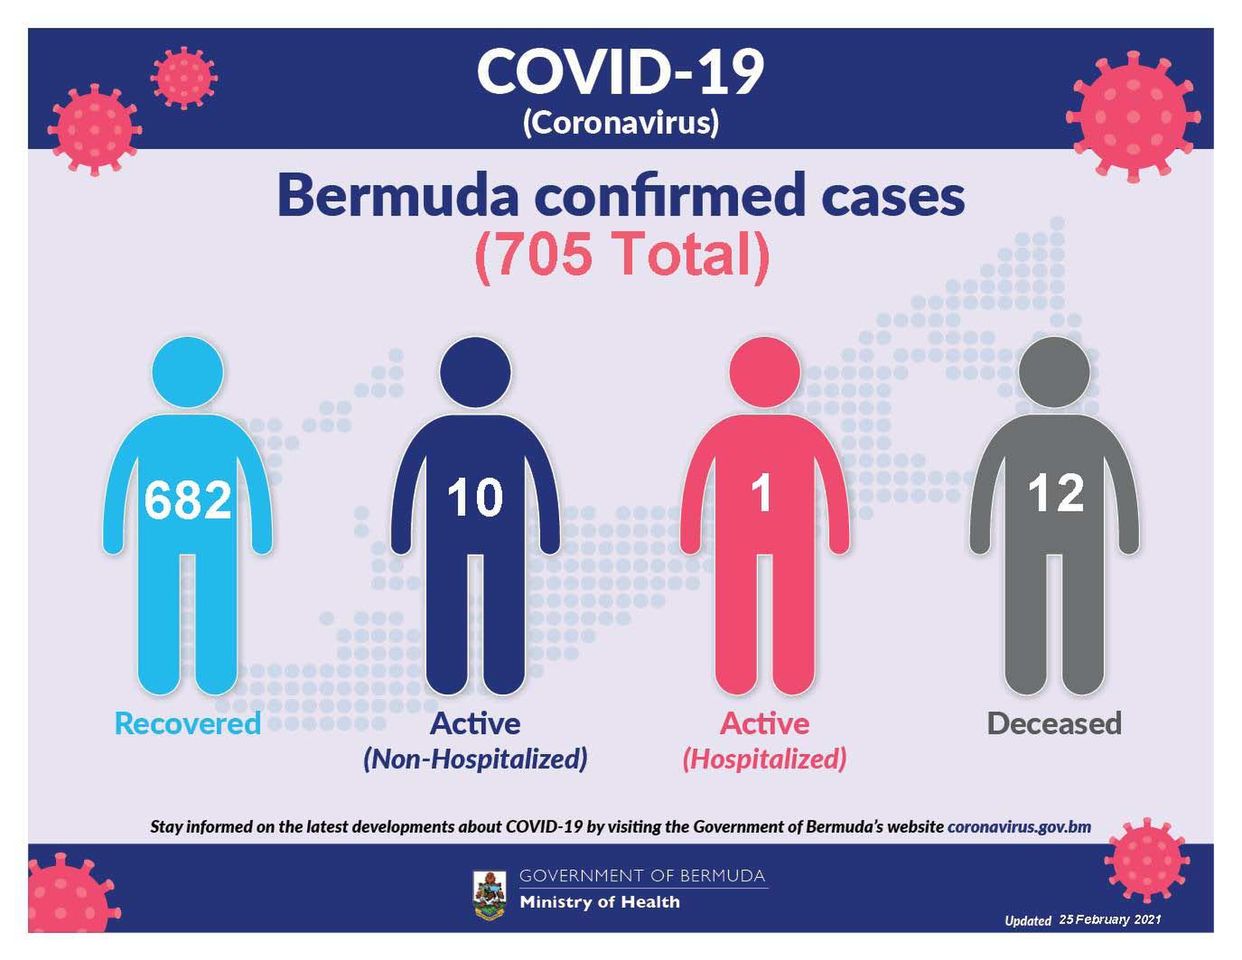 Two new COVID-19 cases reported in Bermuda, 25 February 2021